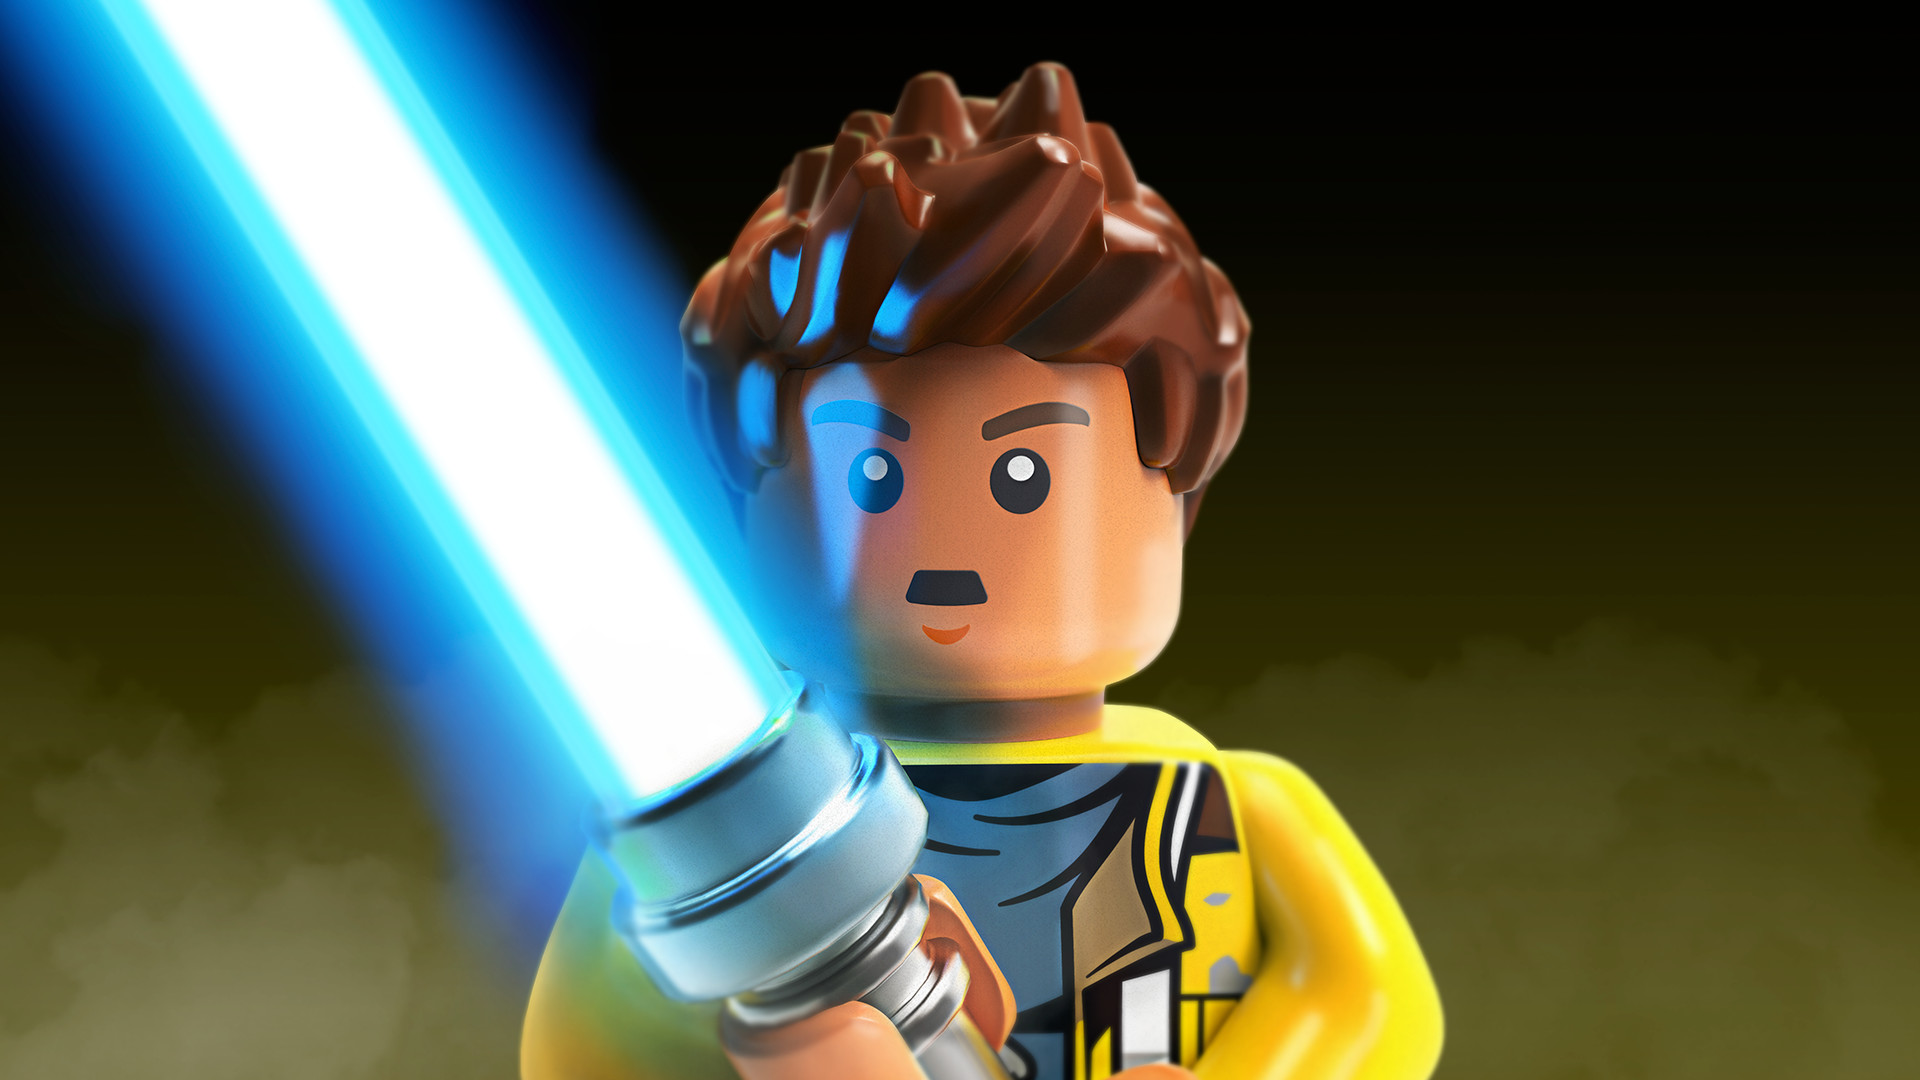 (1.68$) LEGO Star Wars: The Force Awakens - The Freemaker Adventures Character Pack DLC Steam CD Key